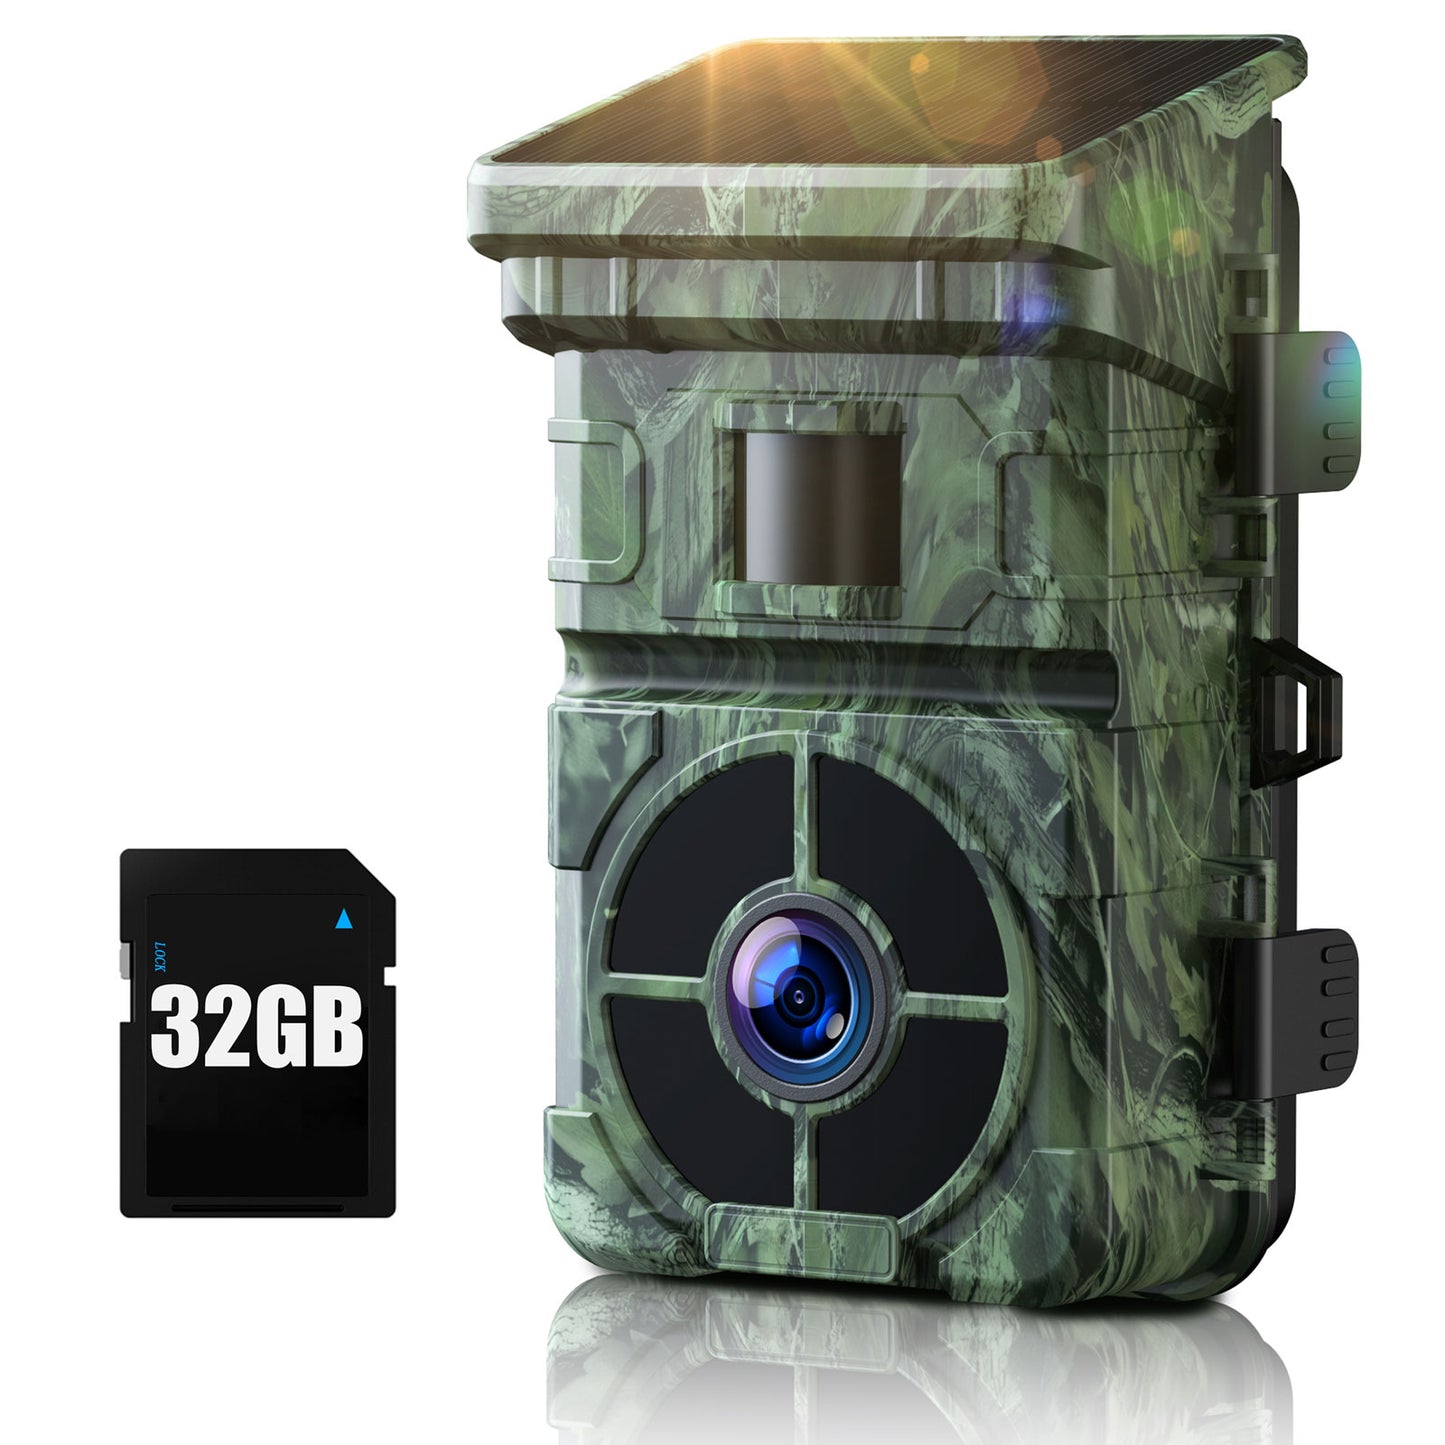 CAMPARK Solar Trail Camera with SD Card 1080P 24MP 2500mAh Built-in Lithium Battery Rechargea Game Deer Hunting Camera with Night Vision Waterproof IP66 Motion Activated 0.1s Trigger Time